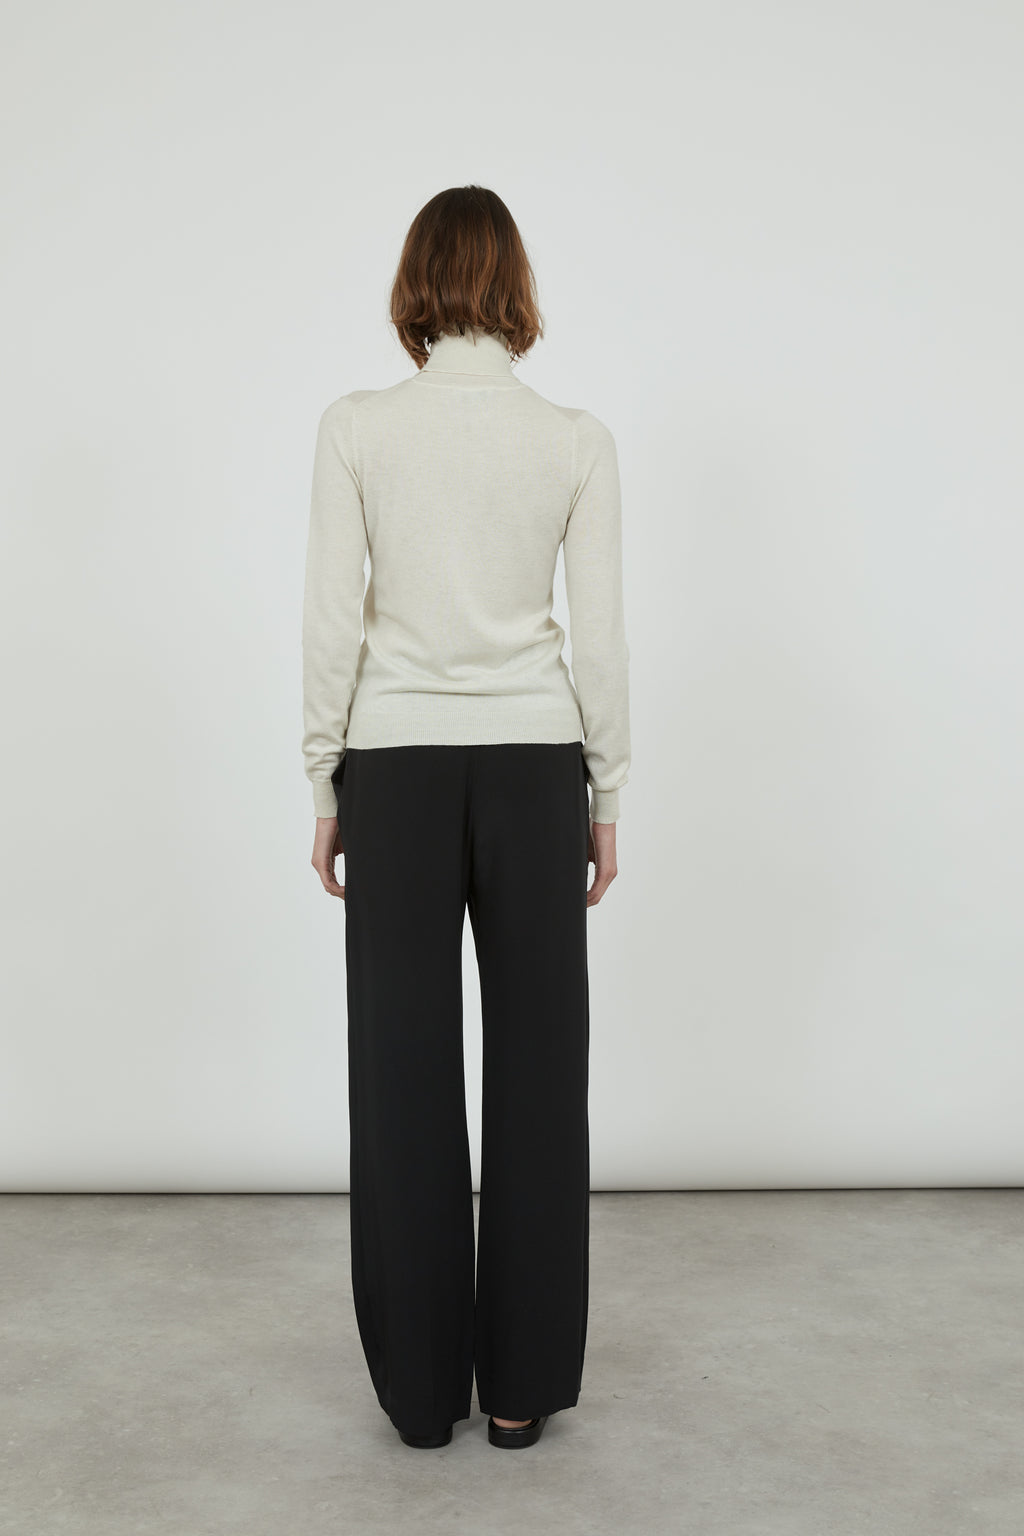 Frederica knitted top | Offwhite - Merino wool